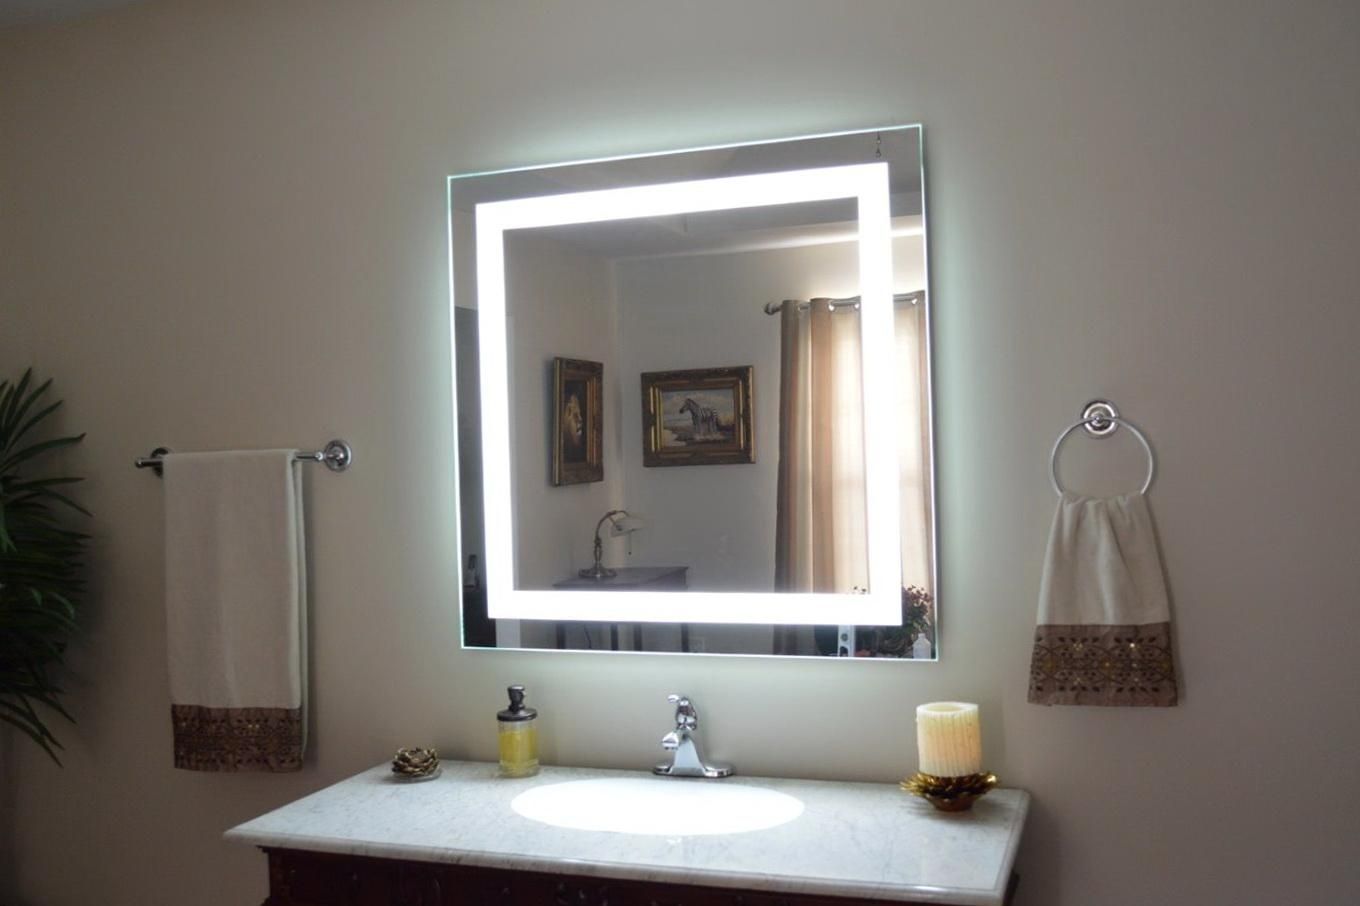 Ikea Bathroom Wall Mirror With Lights Square – Decofurnish Intended For Mirrors With Lights For Bathroom (View 4 of 20)